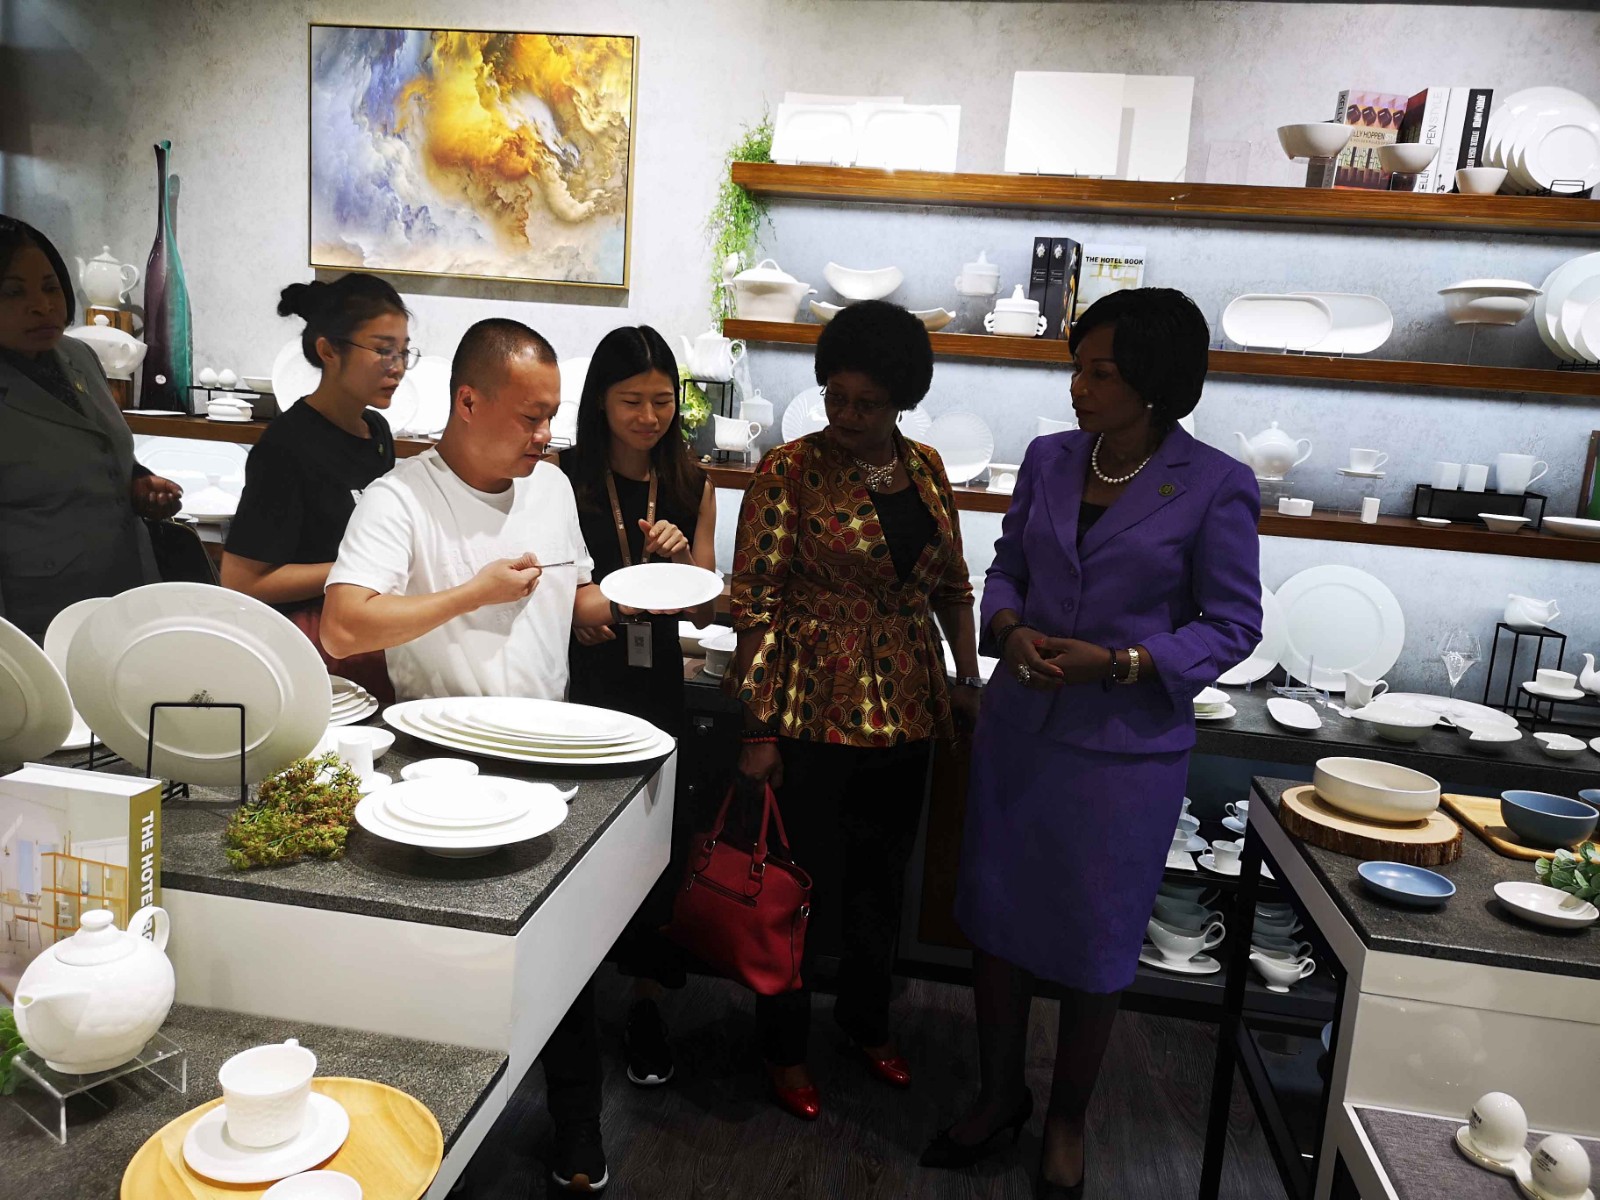 Two Eight-Warmly welcome The wife of president of Malawi comes our Two Eight Ceramics for visiting |-1